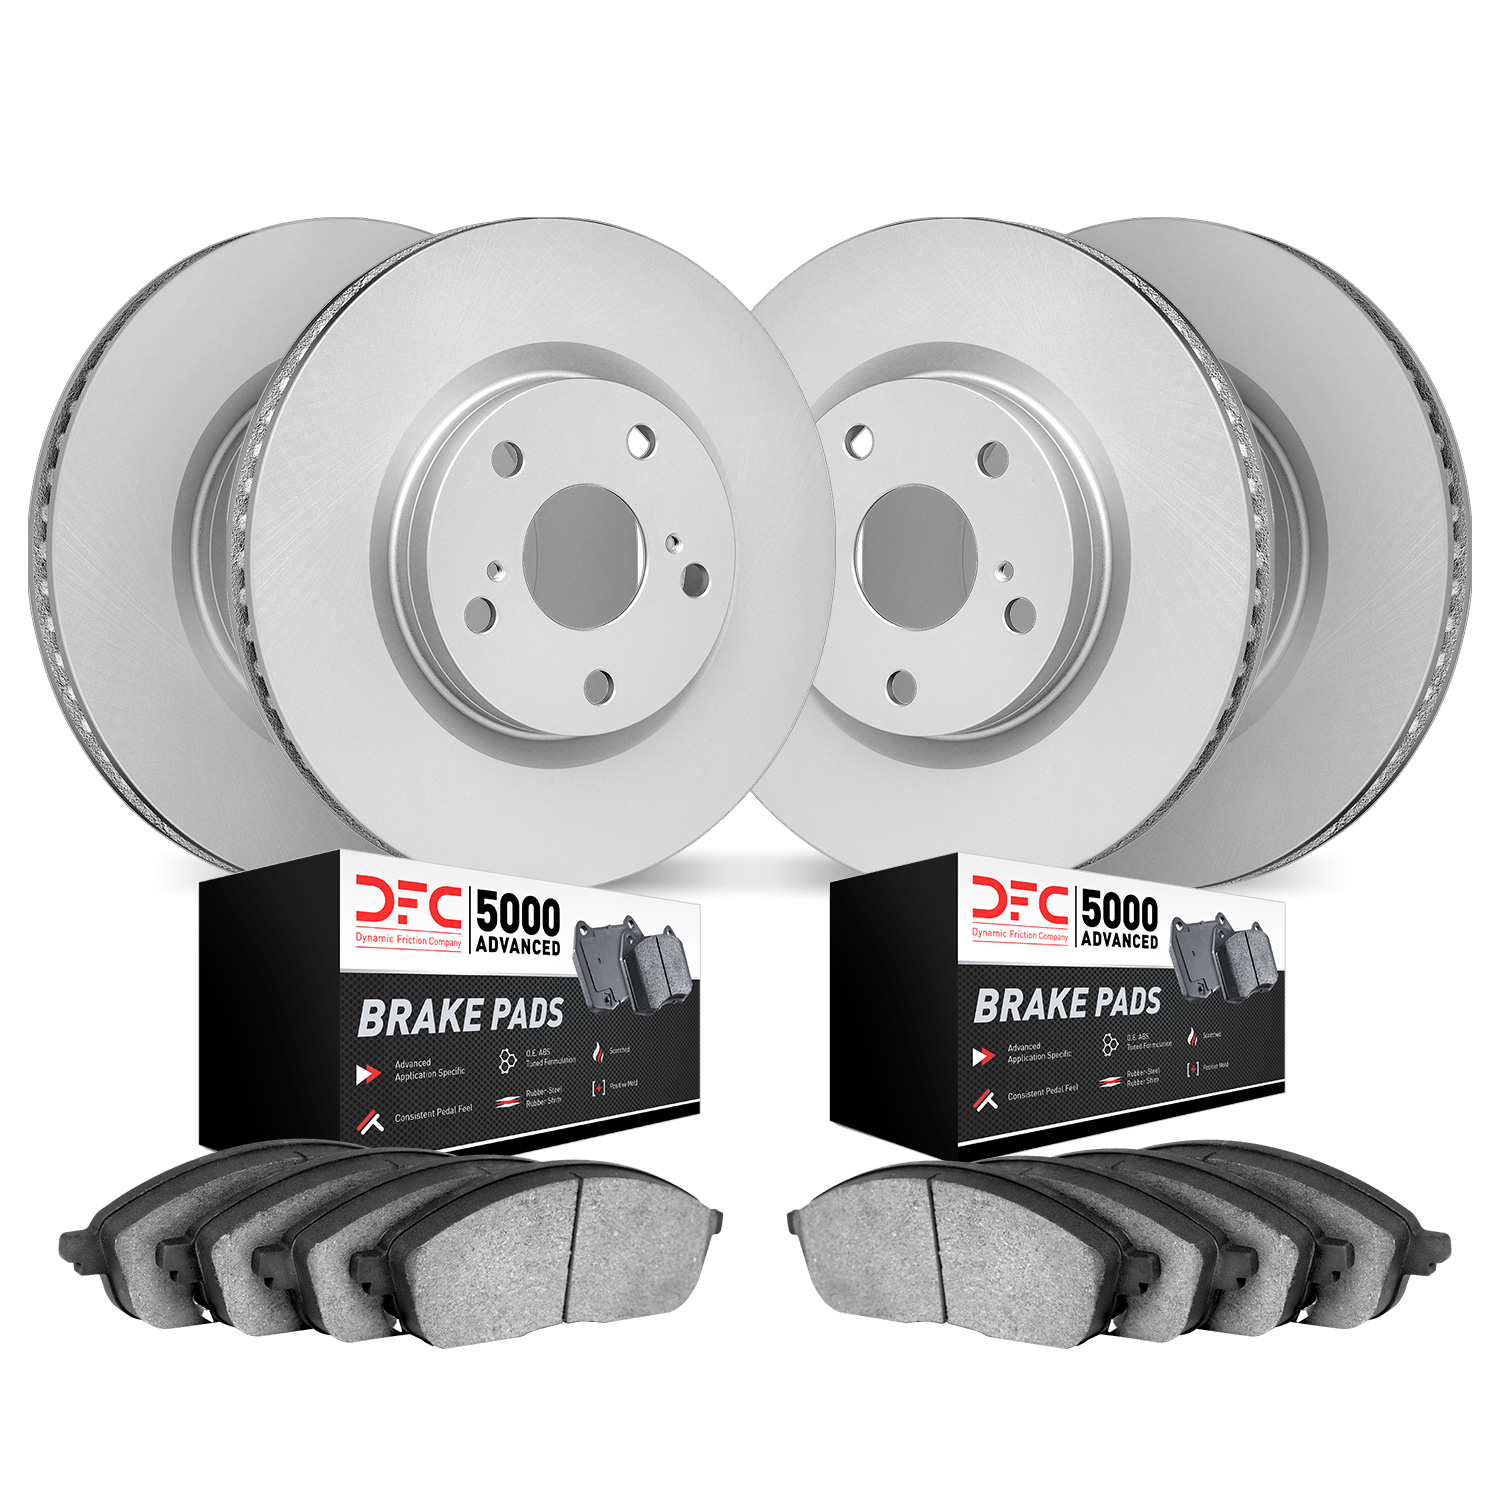 4504-54279 Geospec Brake Rotors w/5000 Advanced Brake Pads Kit, 2013-2019 Ford/Lincoln/Mercury/Mazda, Position: Front and Rear